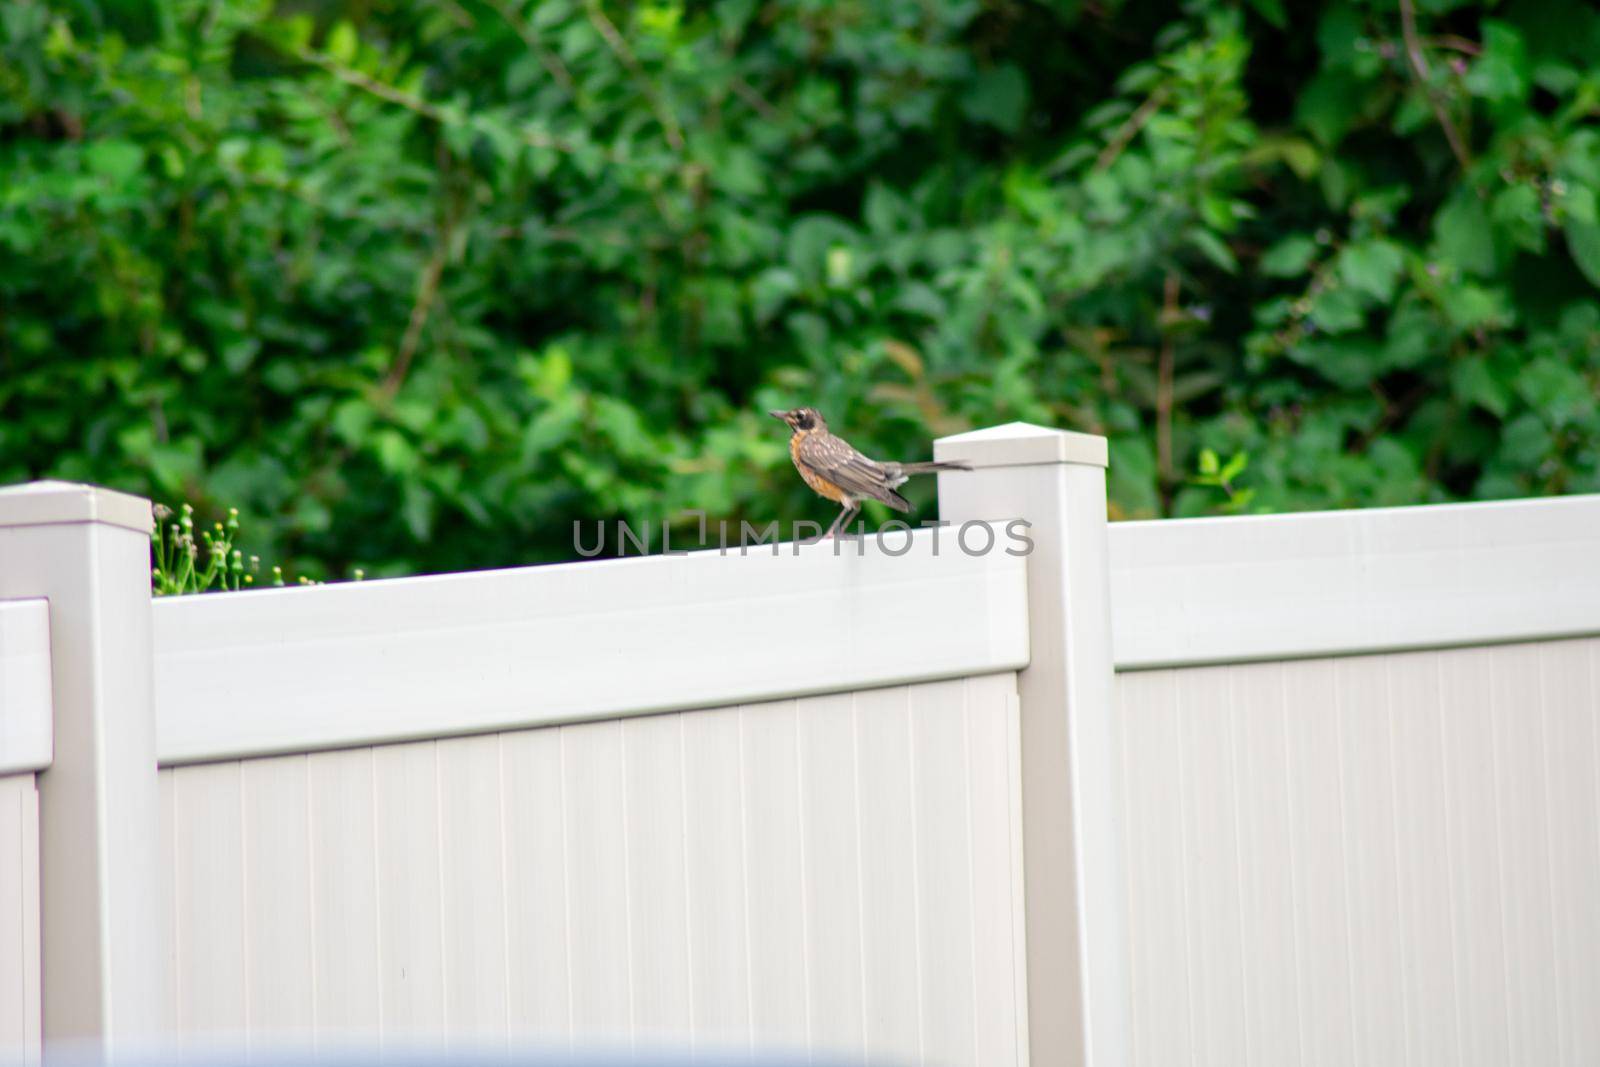 An American Robin on a Fence in Pennsylvania by bju12290